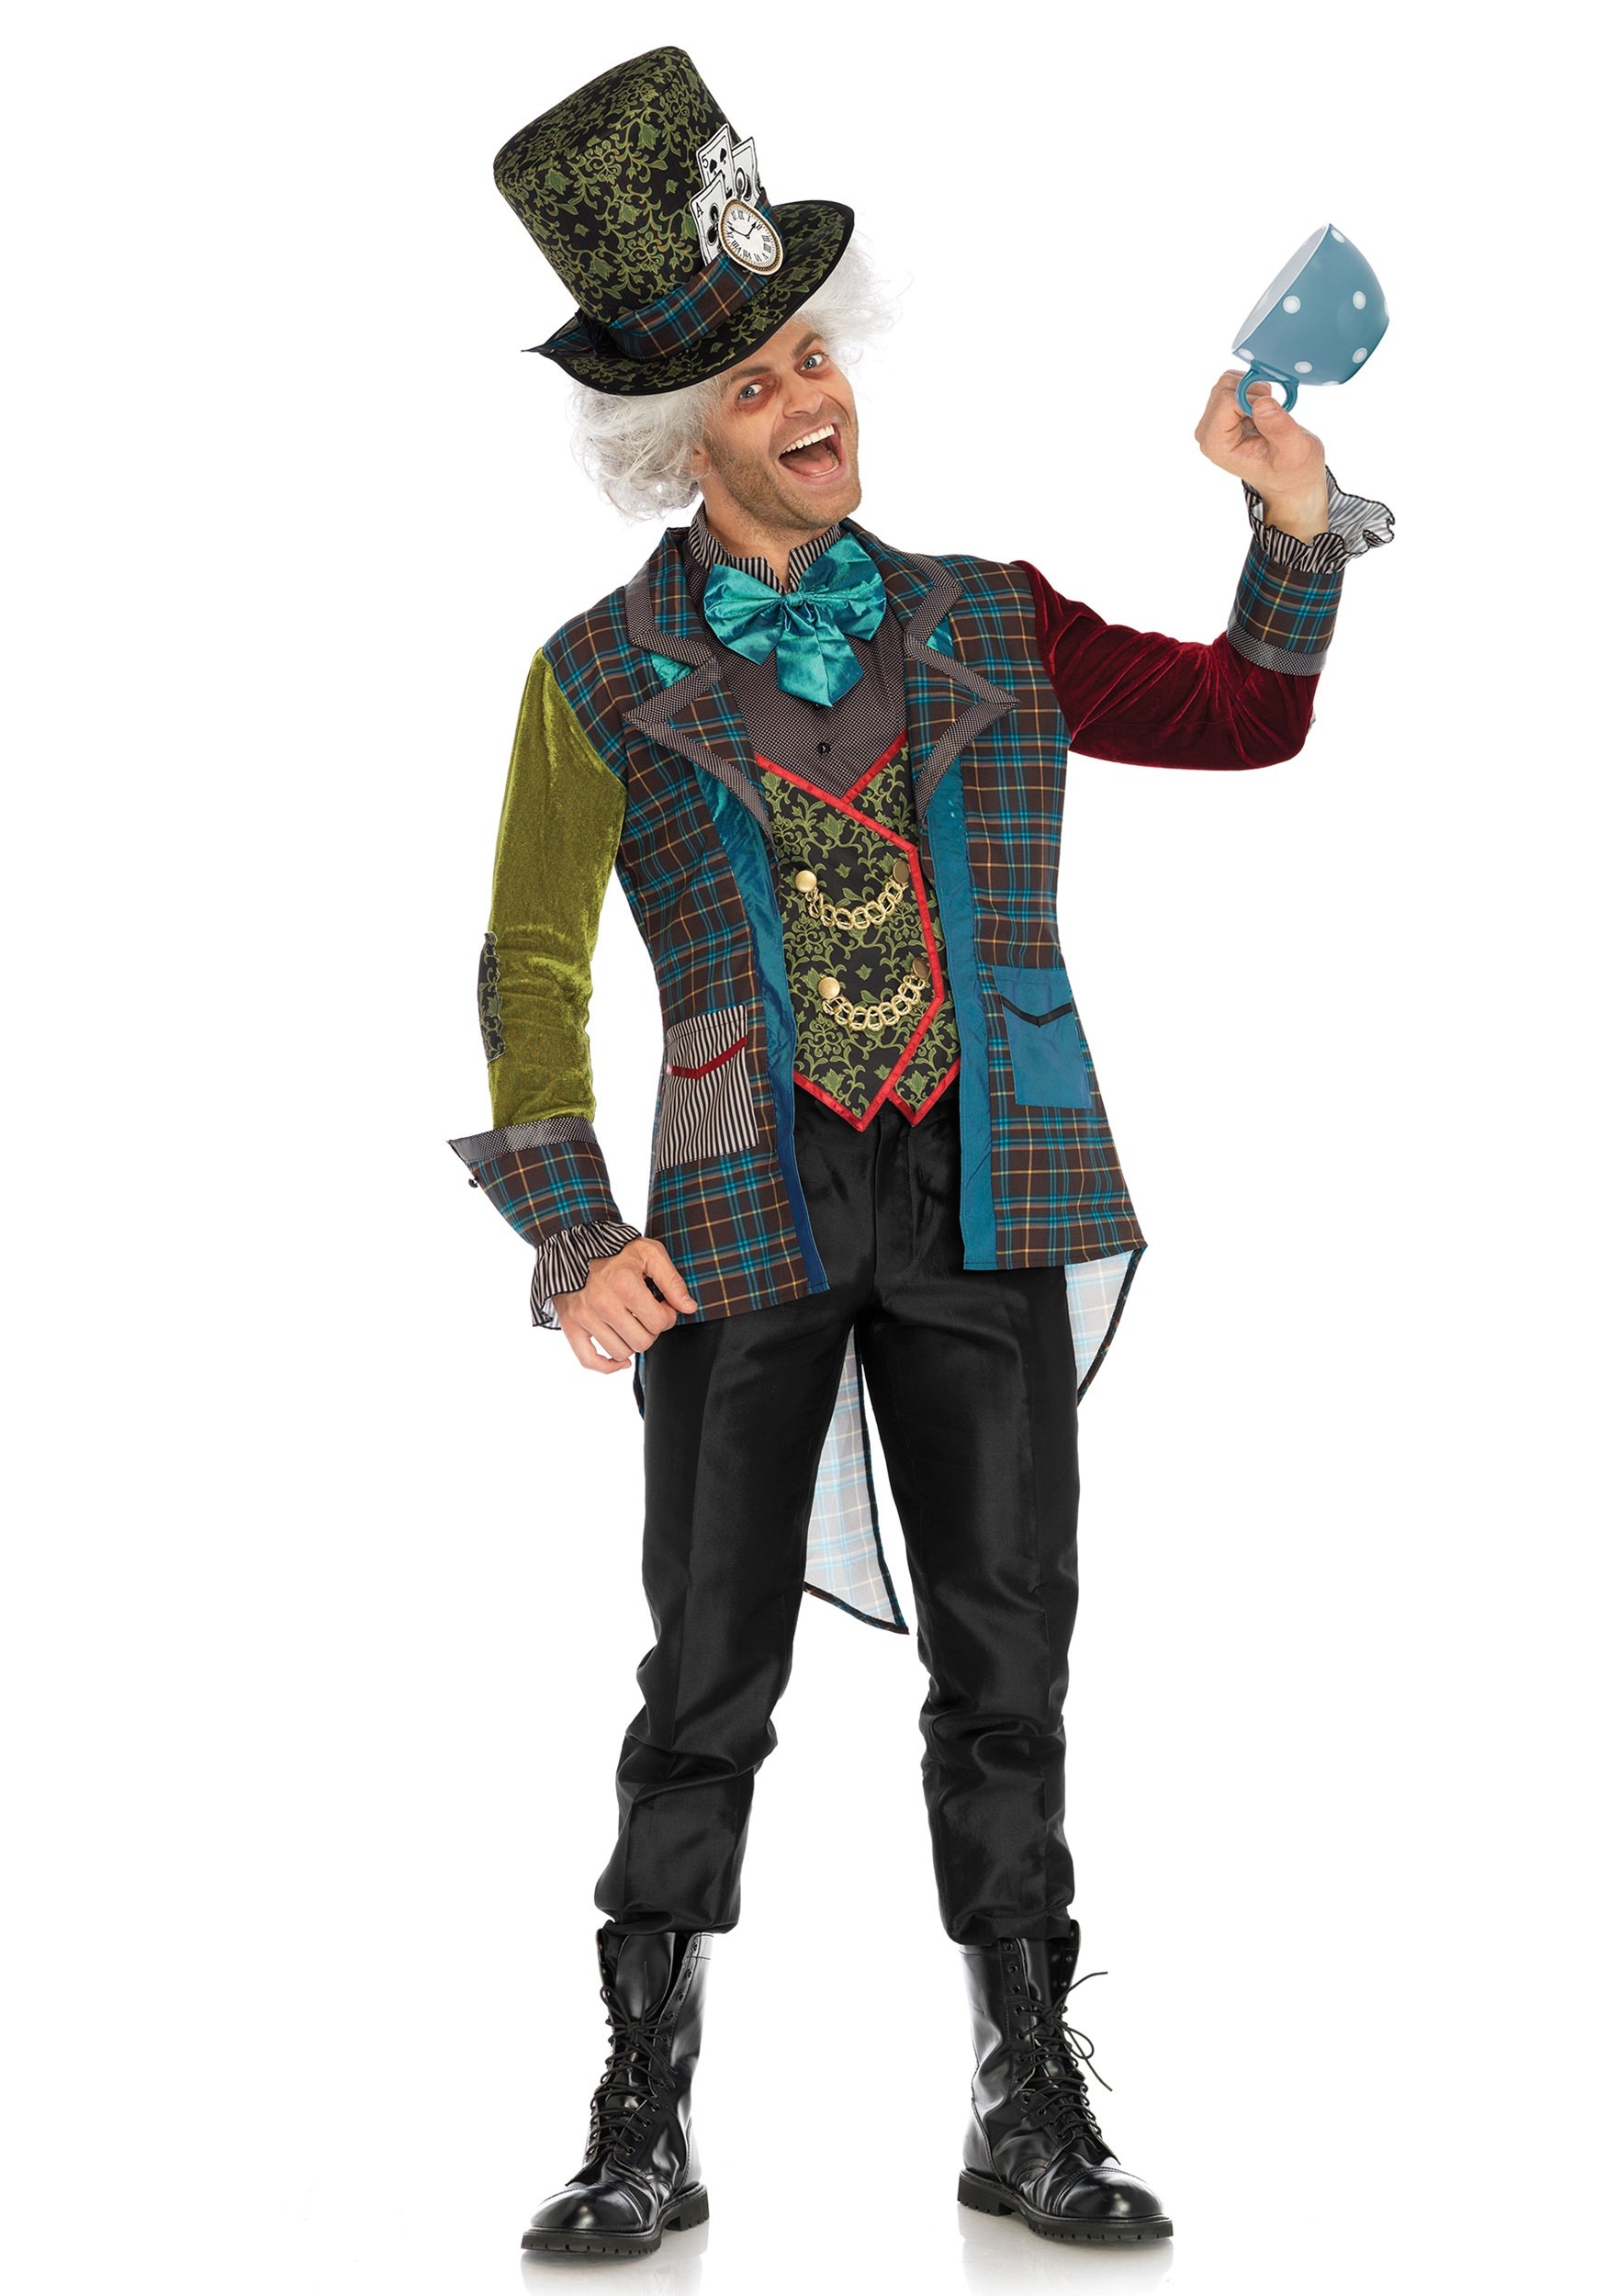 Photos - Fancy Dress MKW Leg Avenue Men's Colorful Mad Hatter Costume Brown/Green LE86691 